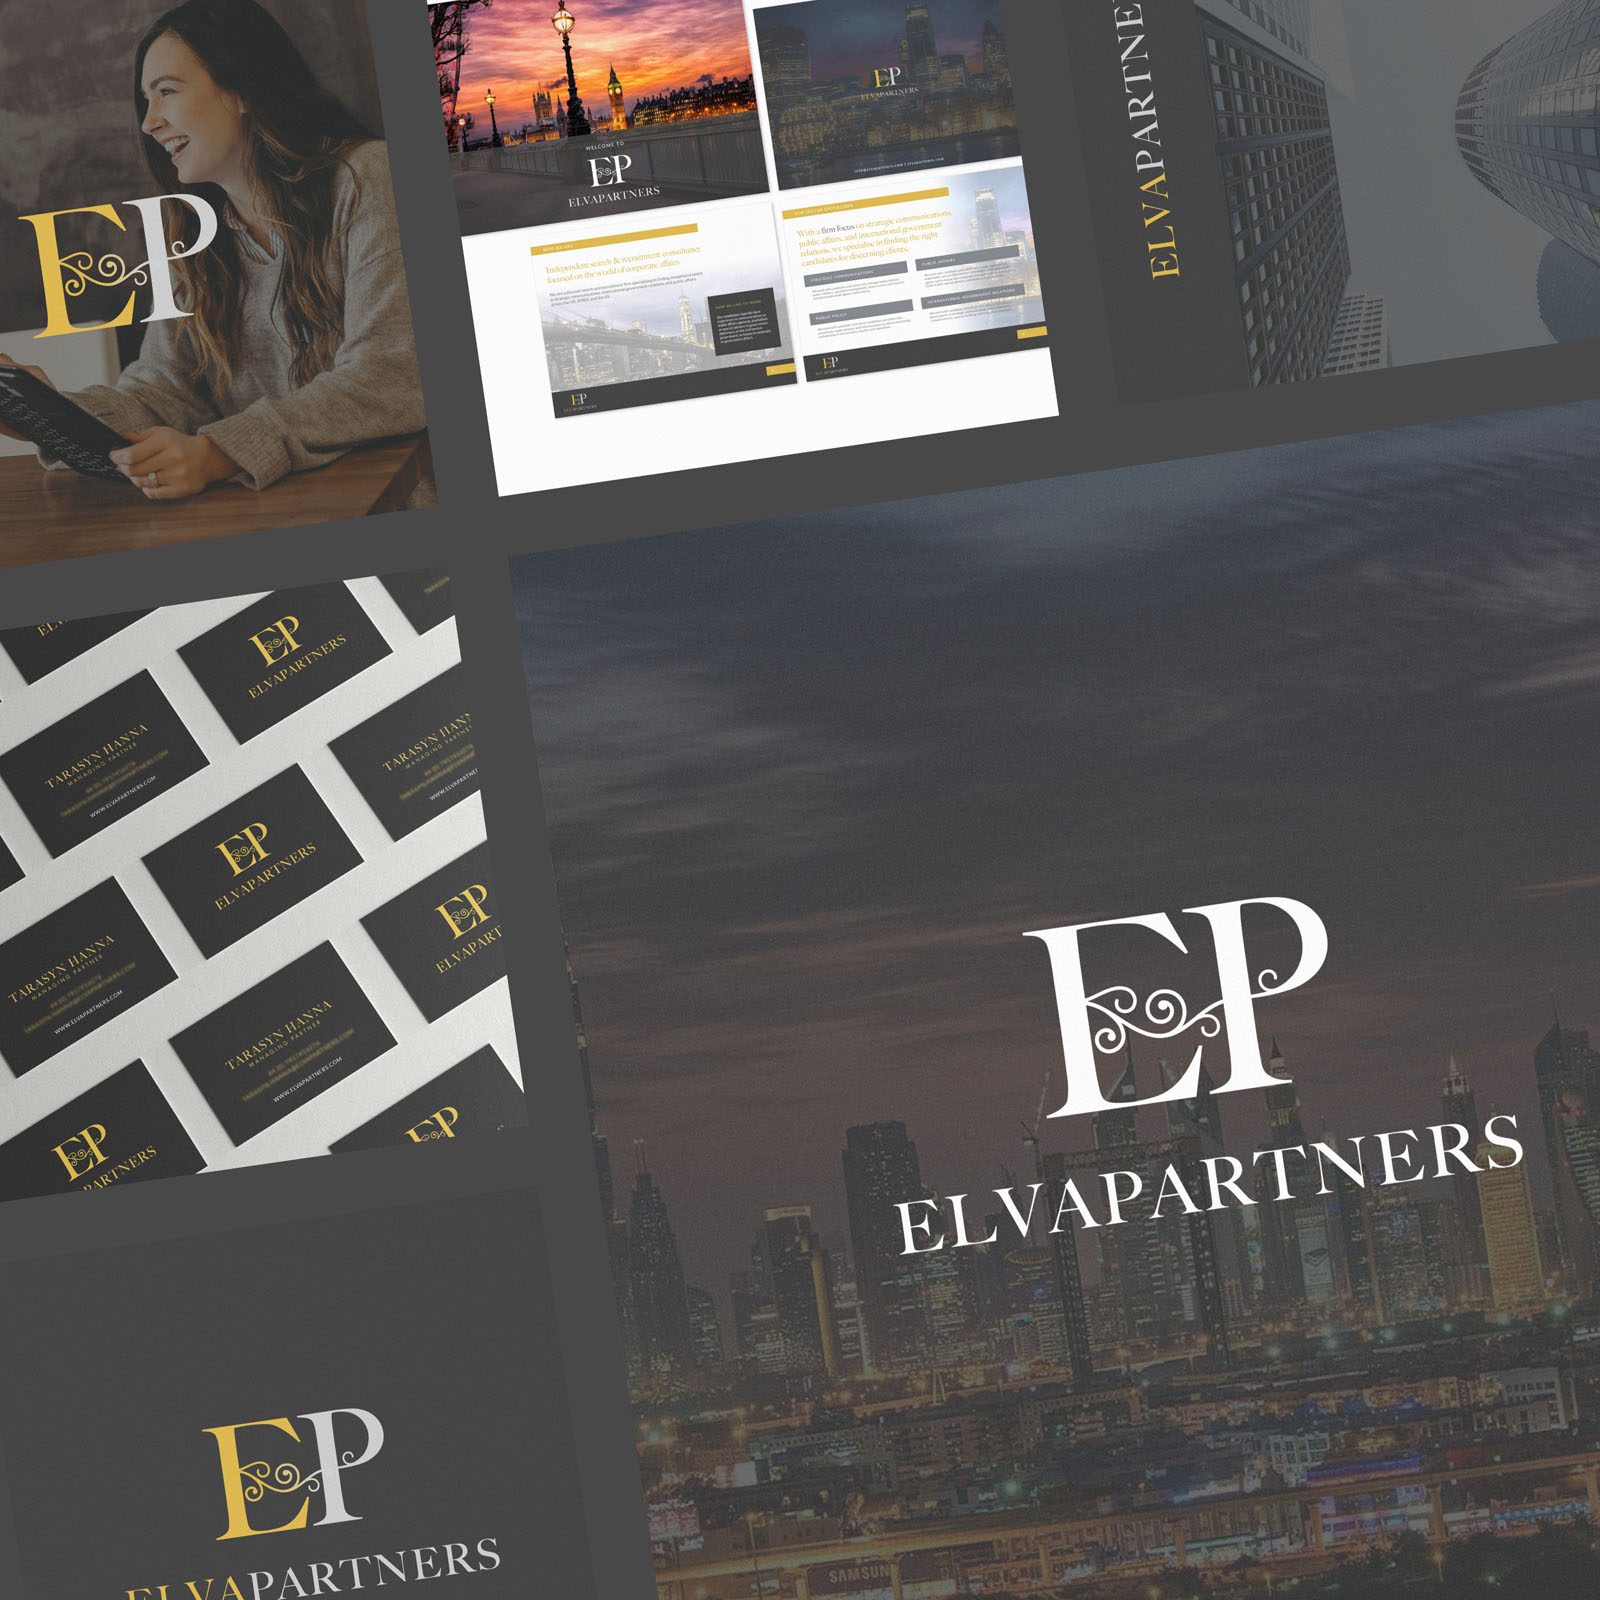 Elva Partners - Recruitment Executive Search Branding and Identity Design Project London